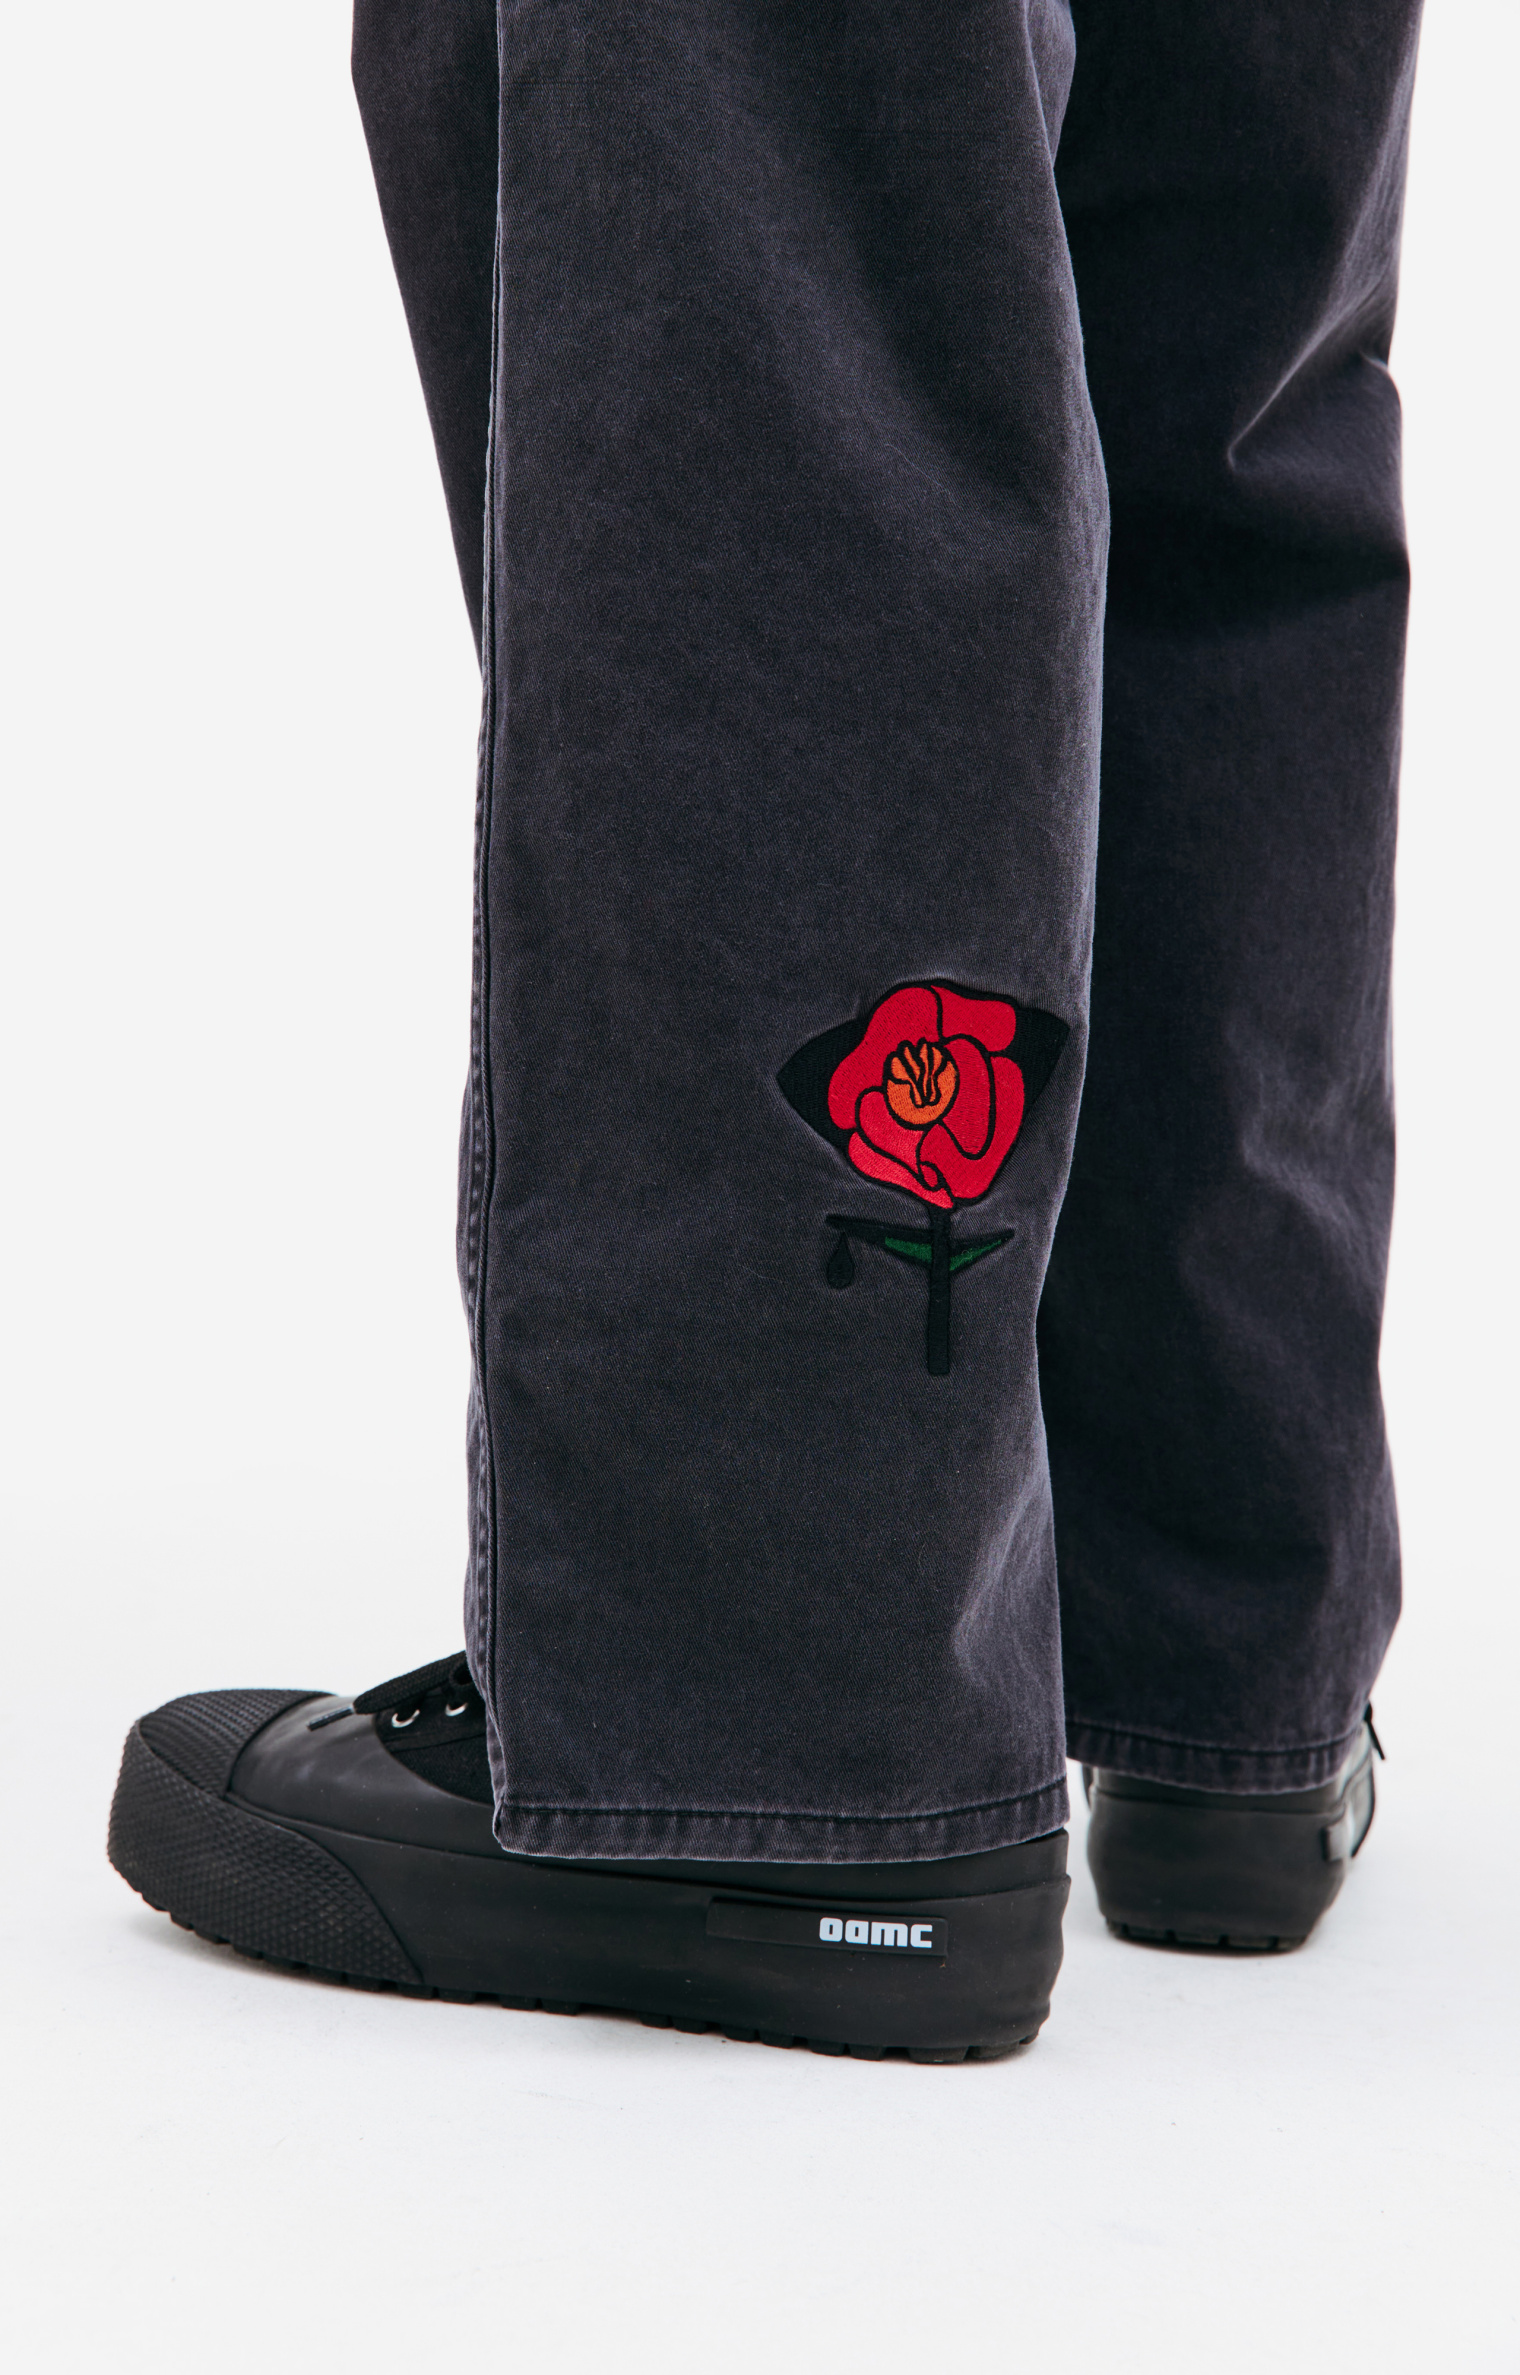 Children of the discordance Embroidered straight jeans